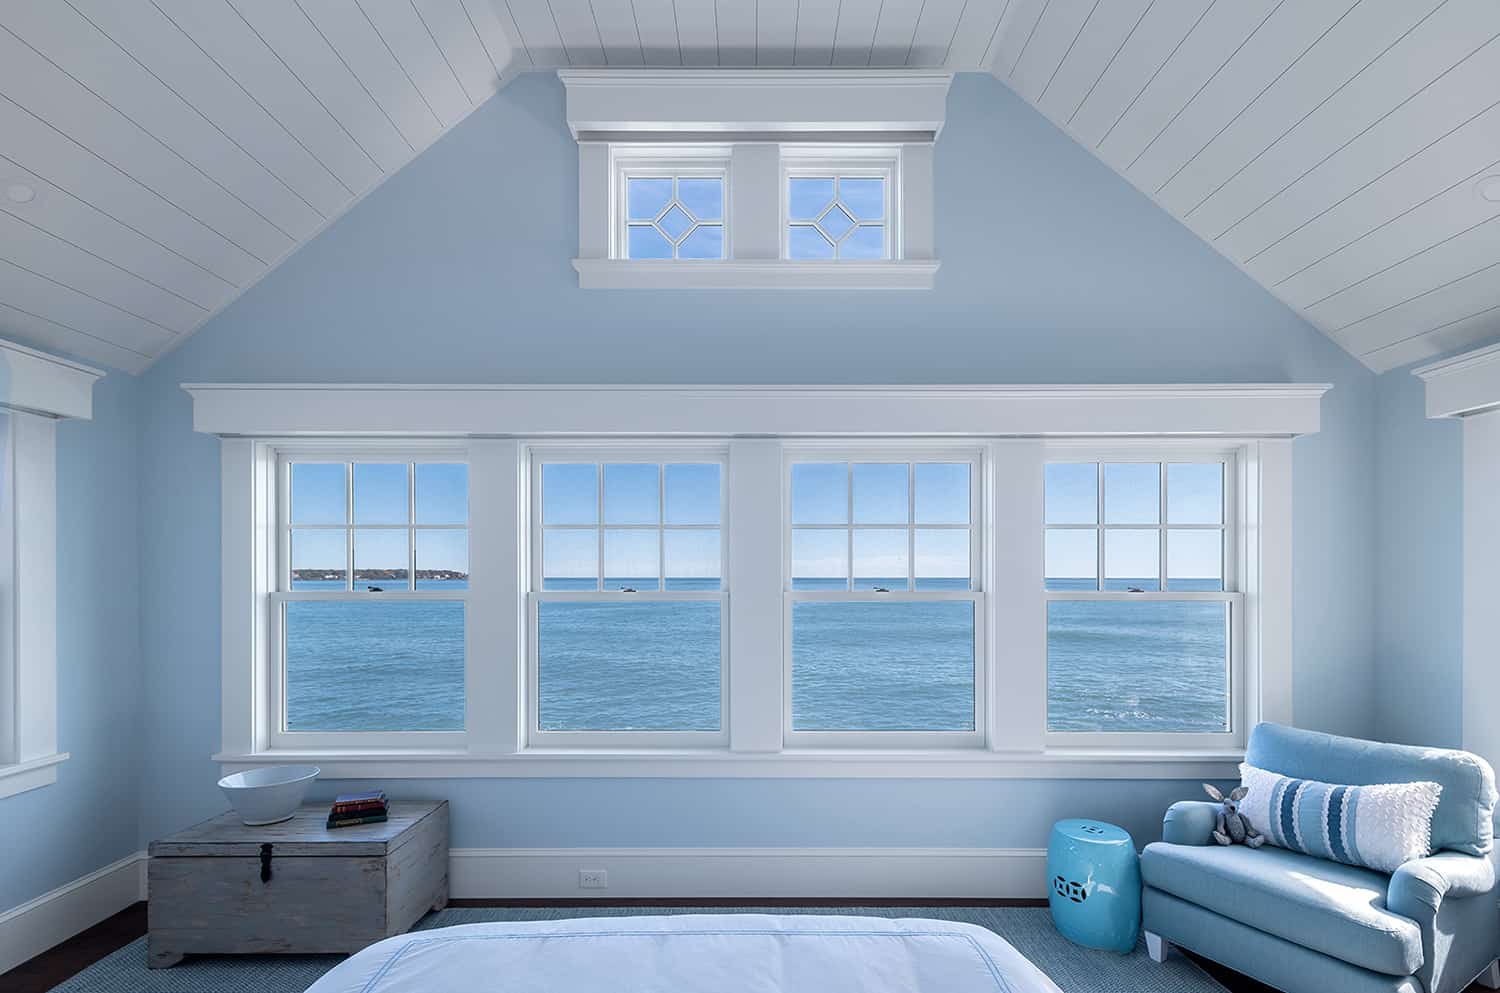 coastal-style-bedroom-window-with-an-ocean-view